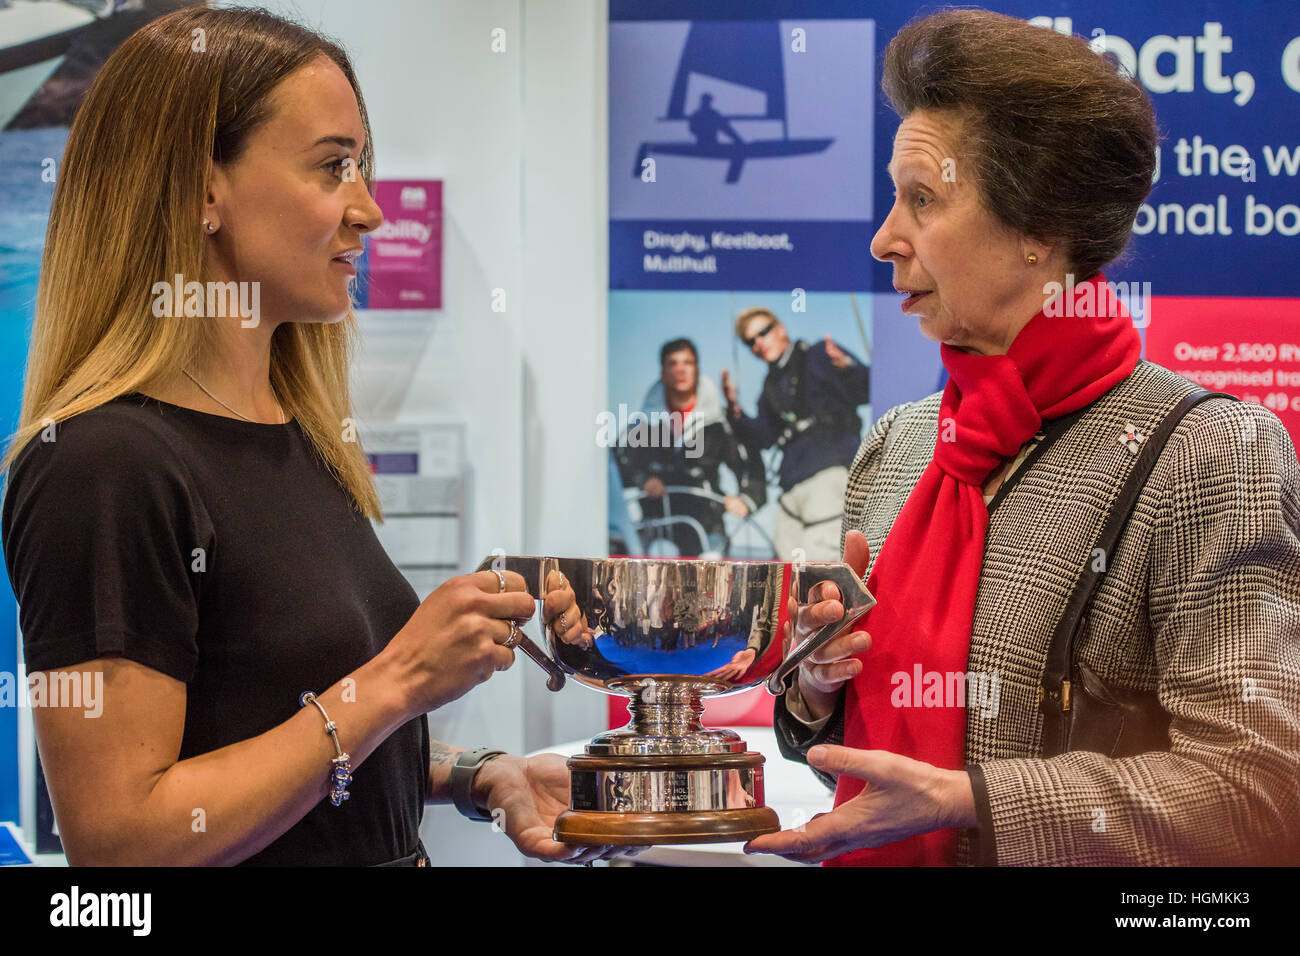 London, UK. 11th January 2017. Princess anne on the RYA stand to give the Yachtmaster of the Year award to Zara Roberts, aged 30 (pictured) - HRH The Princess Royal, Princess Anne, And her husband Vice Admiral Tim Laurence, tour the London Boat Show 2017 at the Excel Centre. Credit: Guy Bell/Alamy Live News Stock Photo